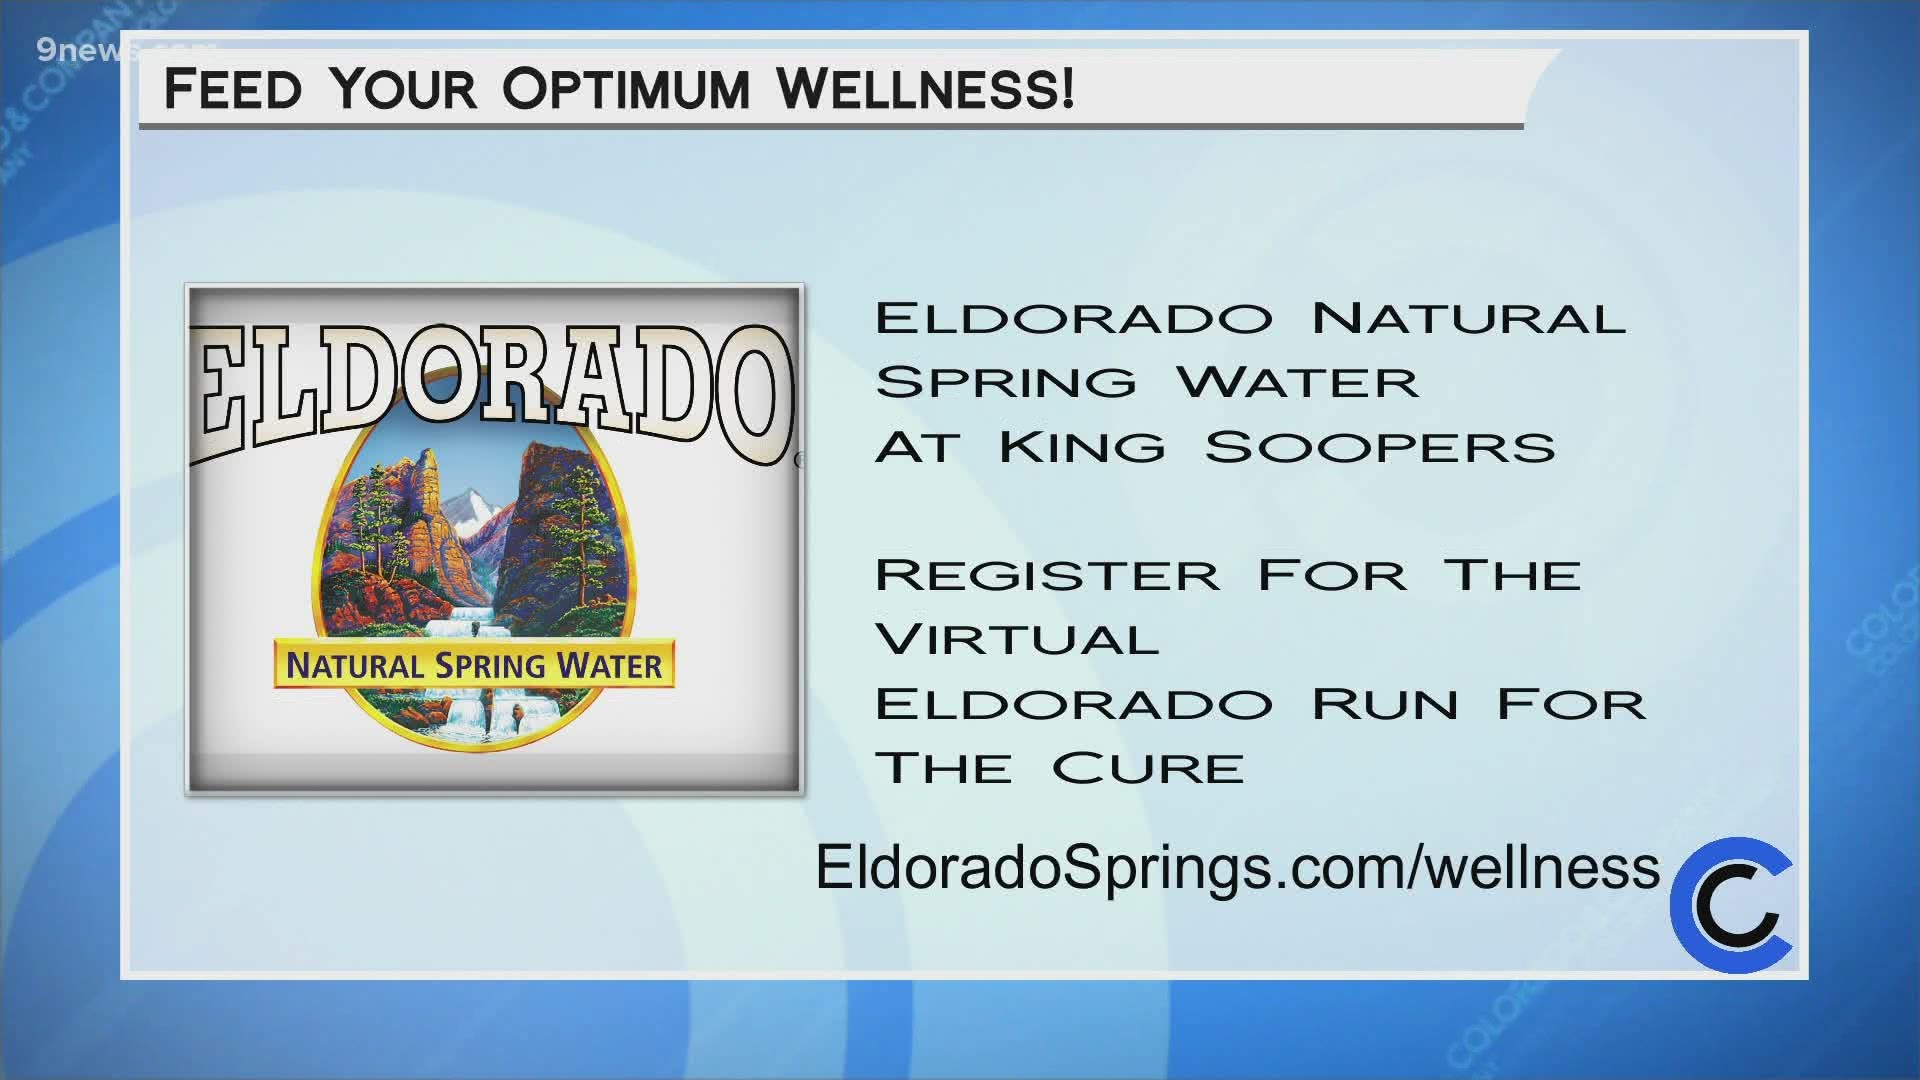 Find Eldorado Natural Spring Water at King Soopers, your home for Optimum Wellness. You can also check out EldoradoSprings.com/Wellness.